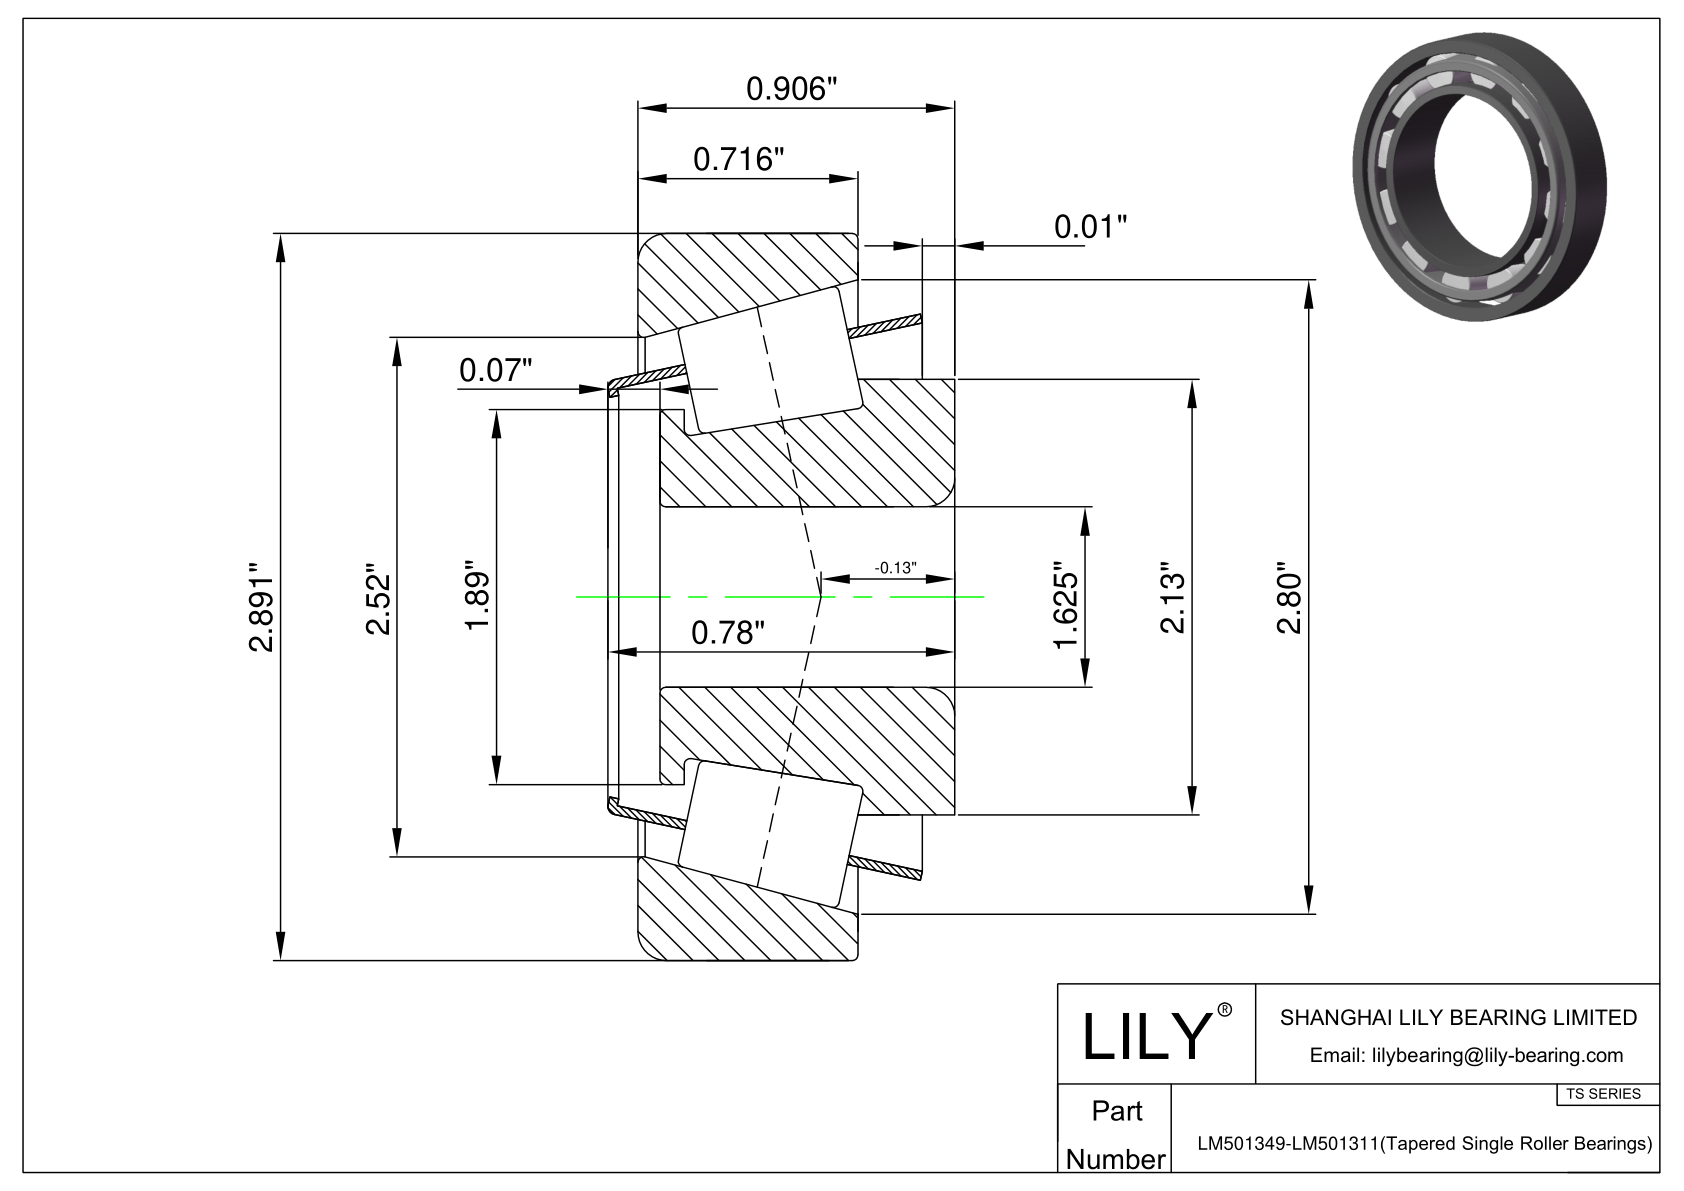 LM501349-LM501311 TS (Tapered Single Roller Bearings) (Imperial) cad drawing